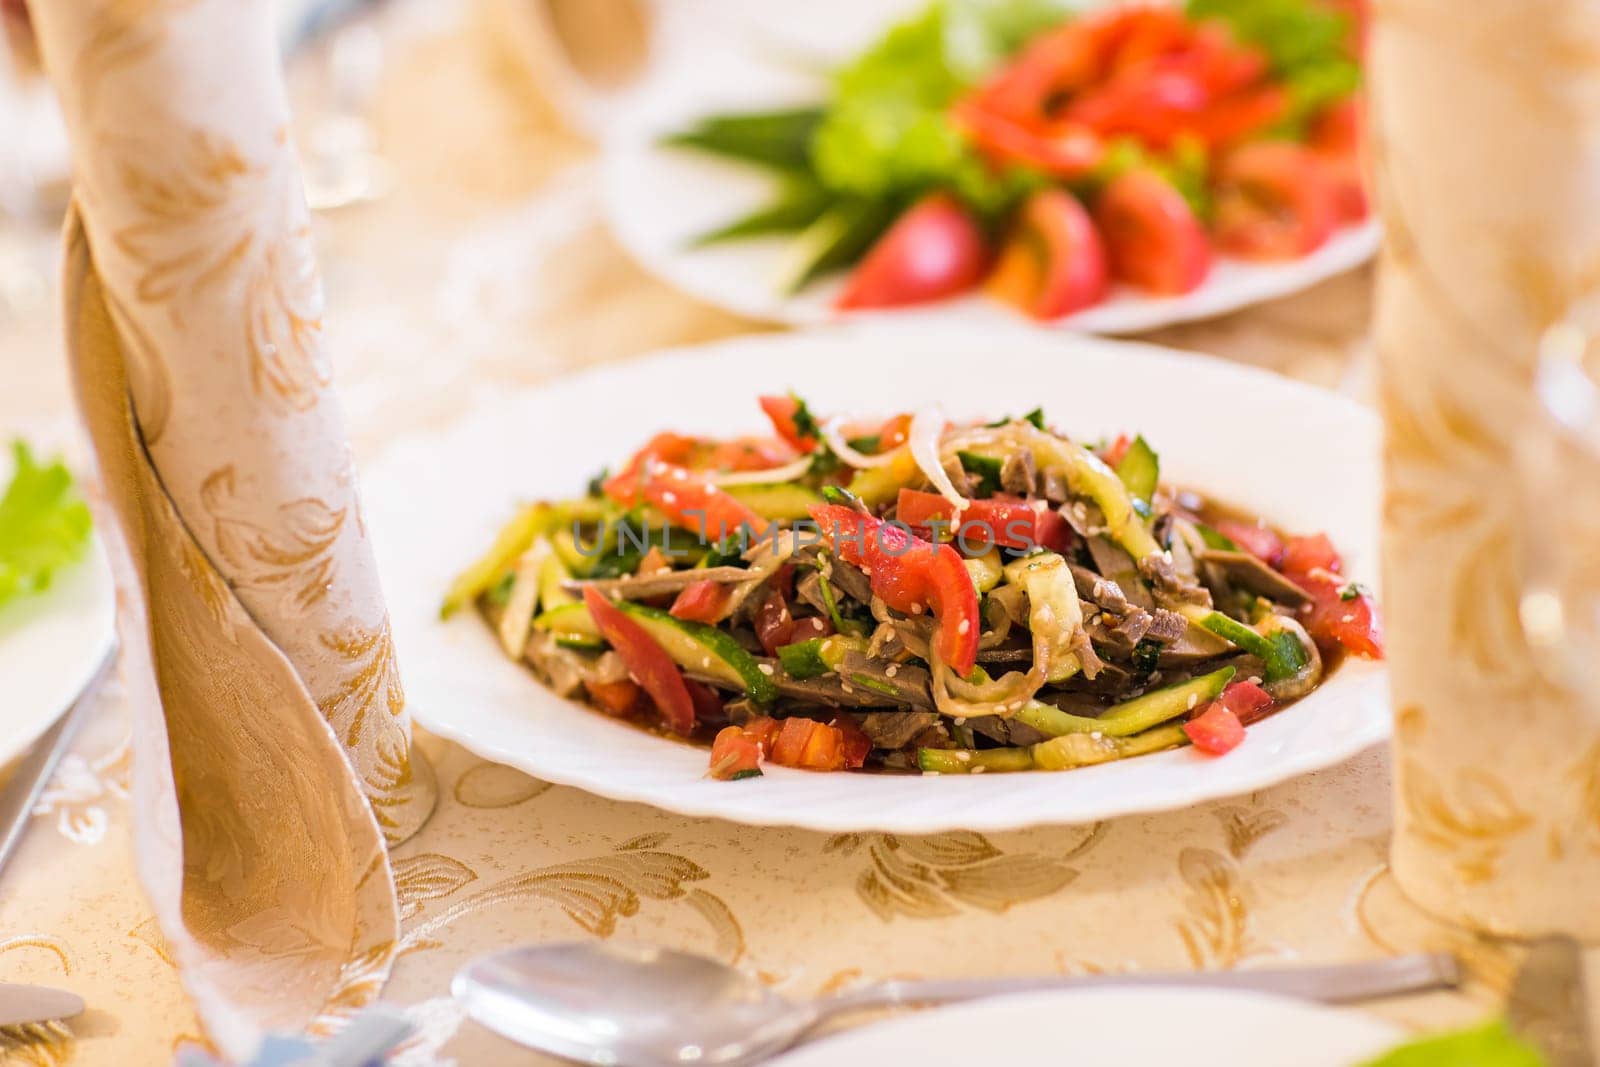 Salad with meat, mushrooms and tomatoes by Satura86